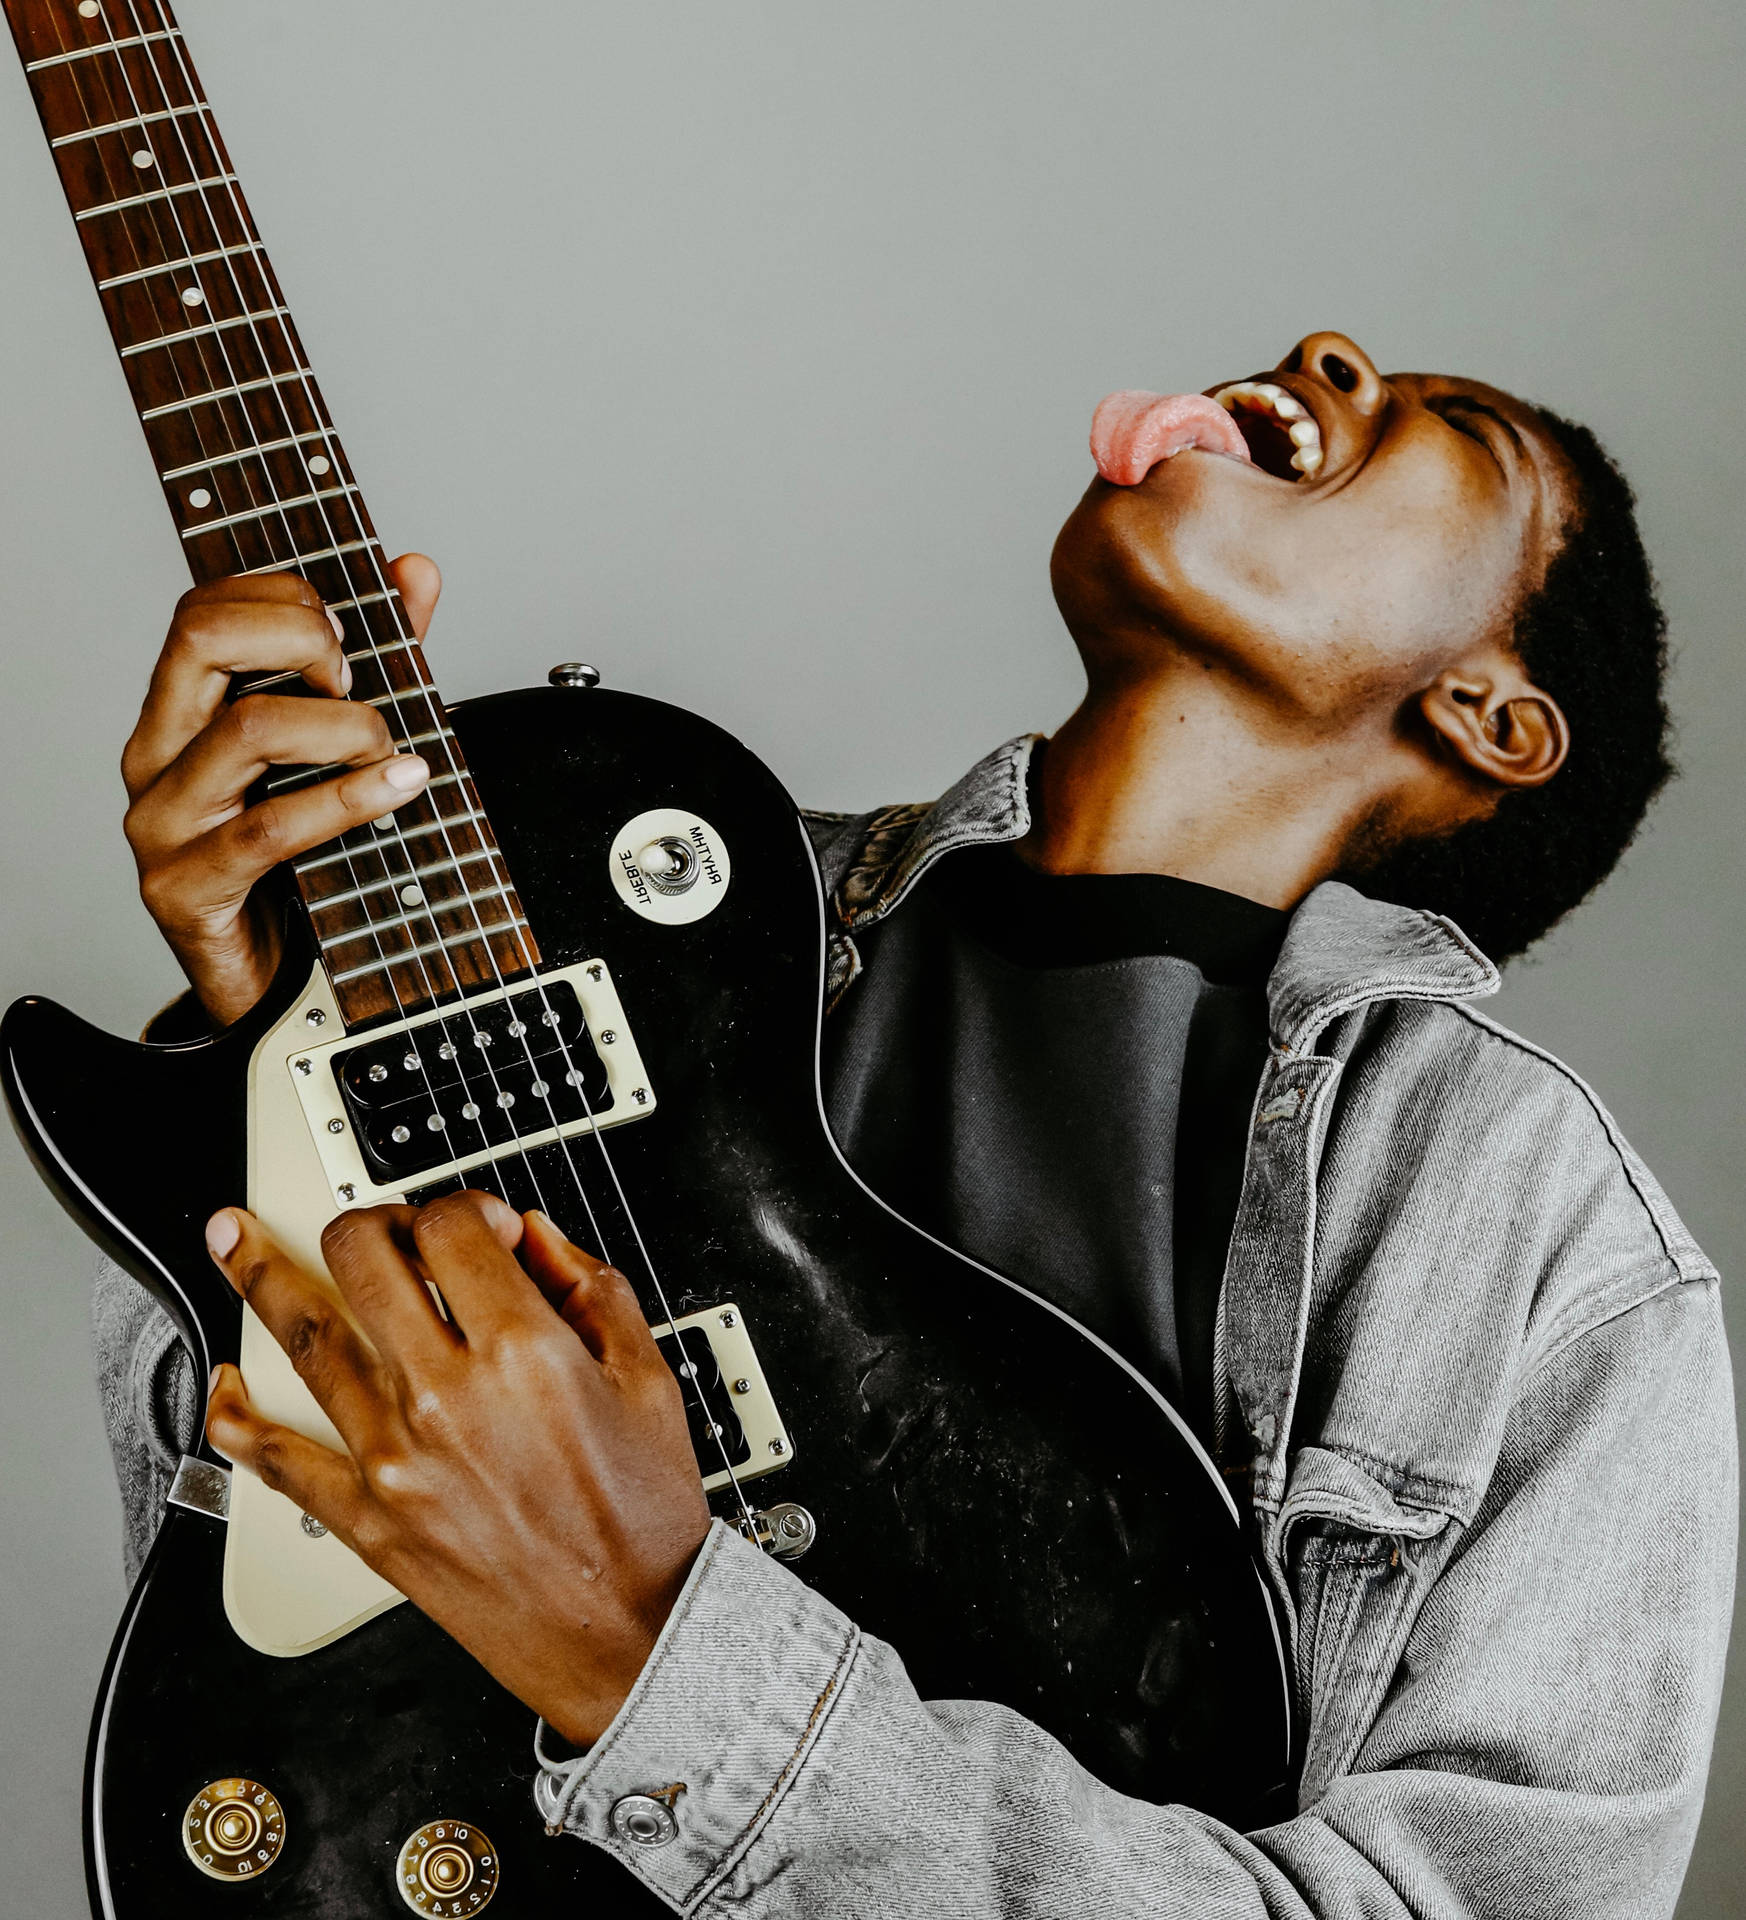 Electric Guitar Improvising In The Shadow Of Black Aesthetic Wallpaper